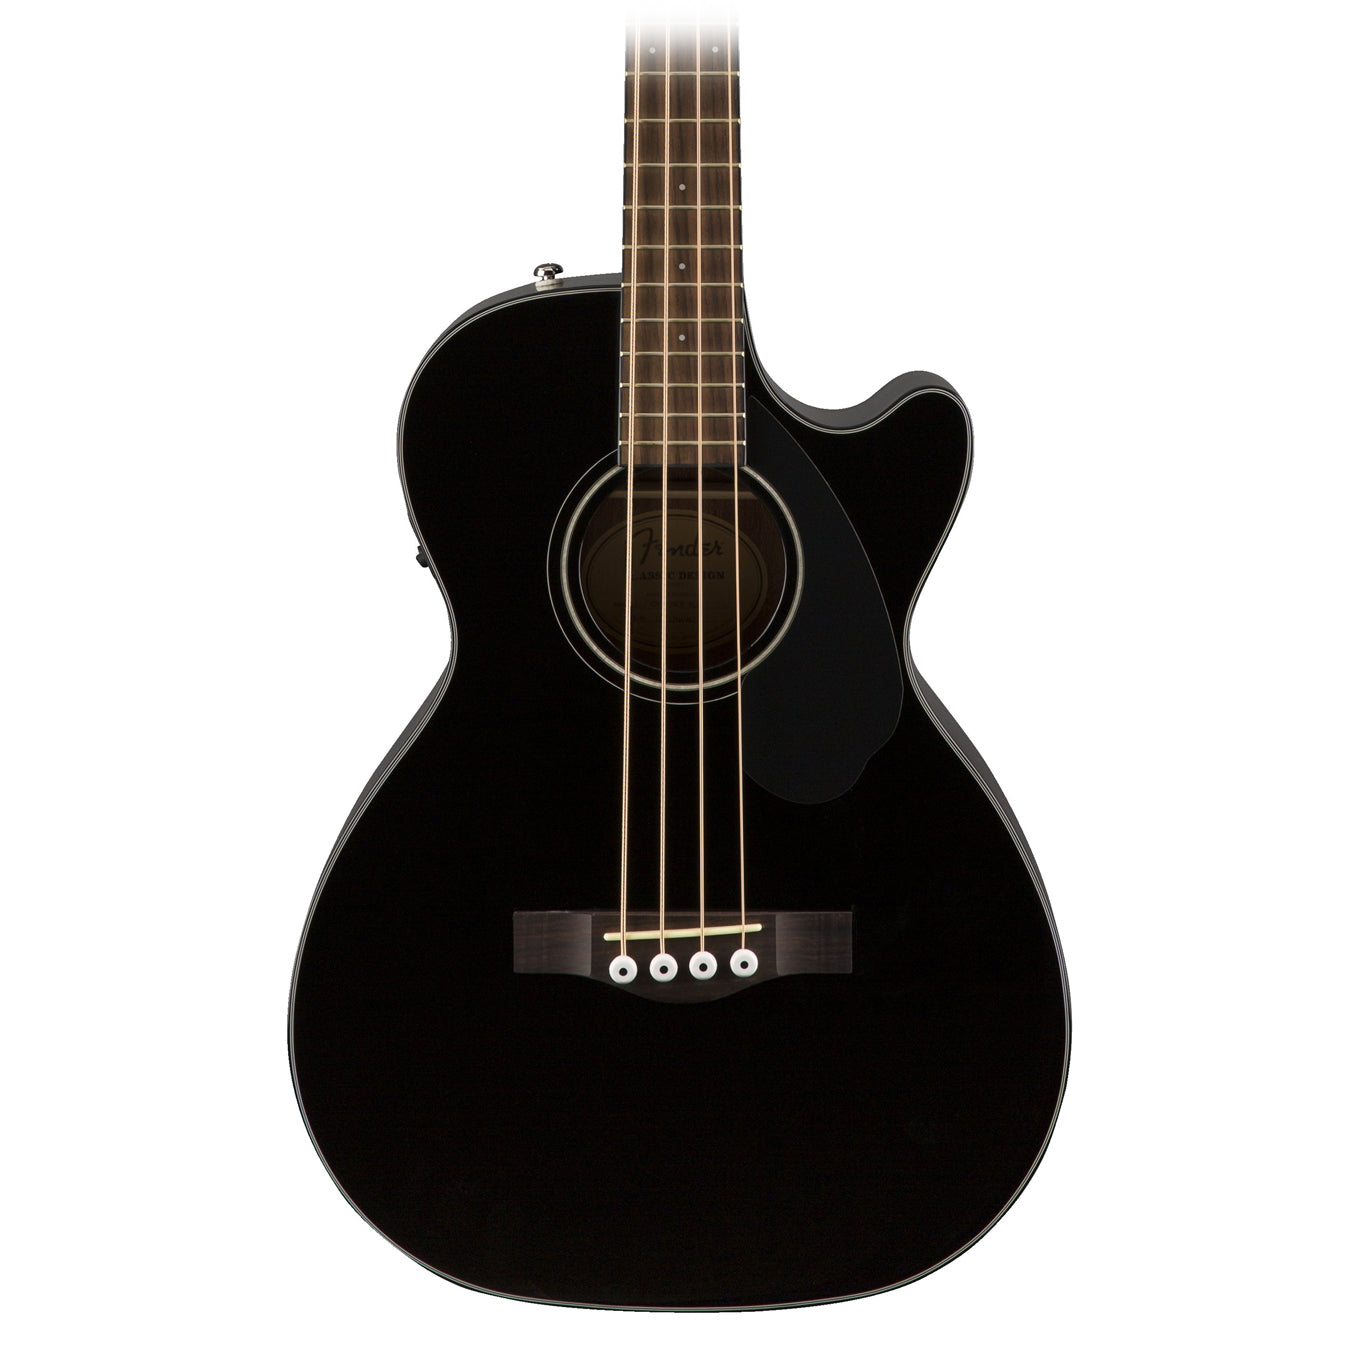 Fender CB60SCE 4 String Acoustic Electric Bass Guitar in Black